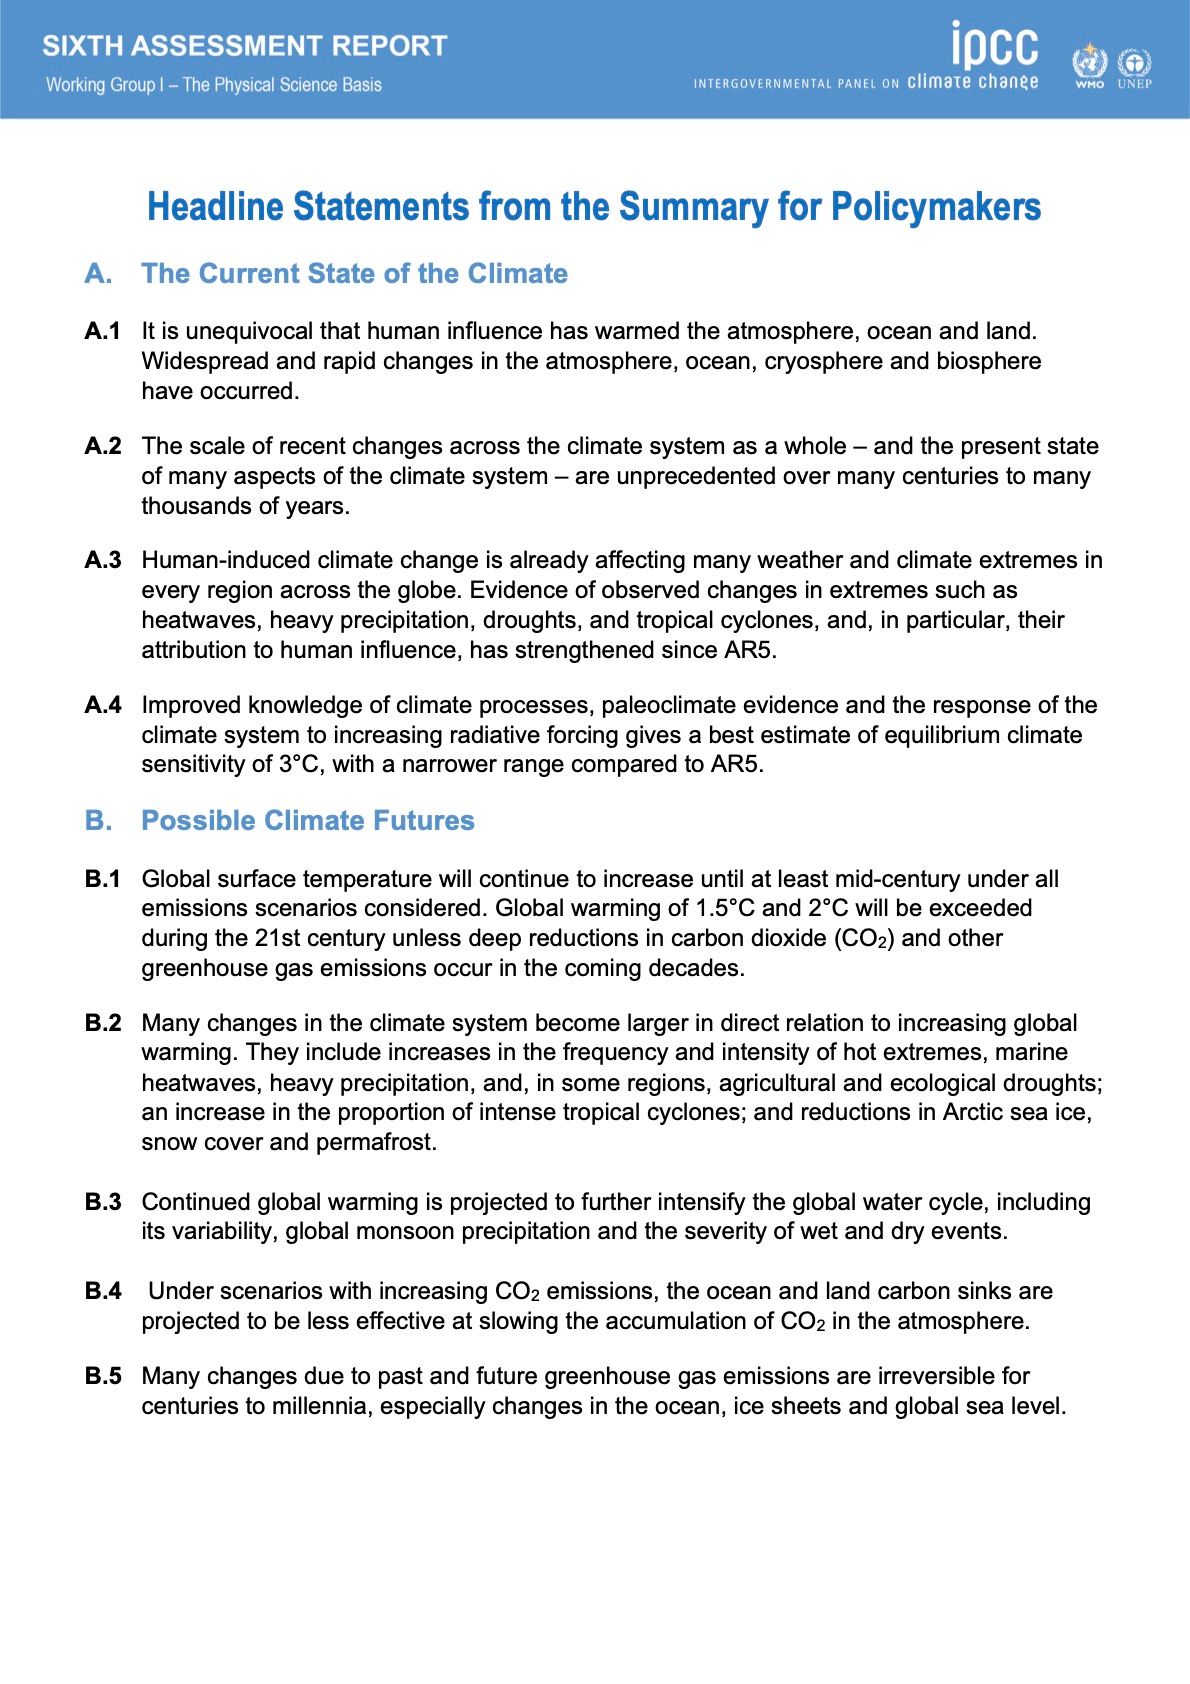 IPCC Headline Statements from the Summary for Policymakers